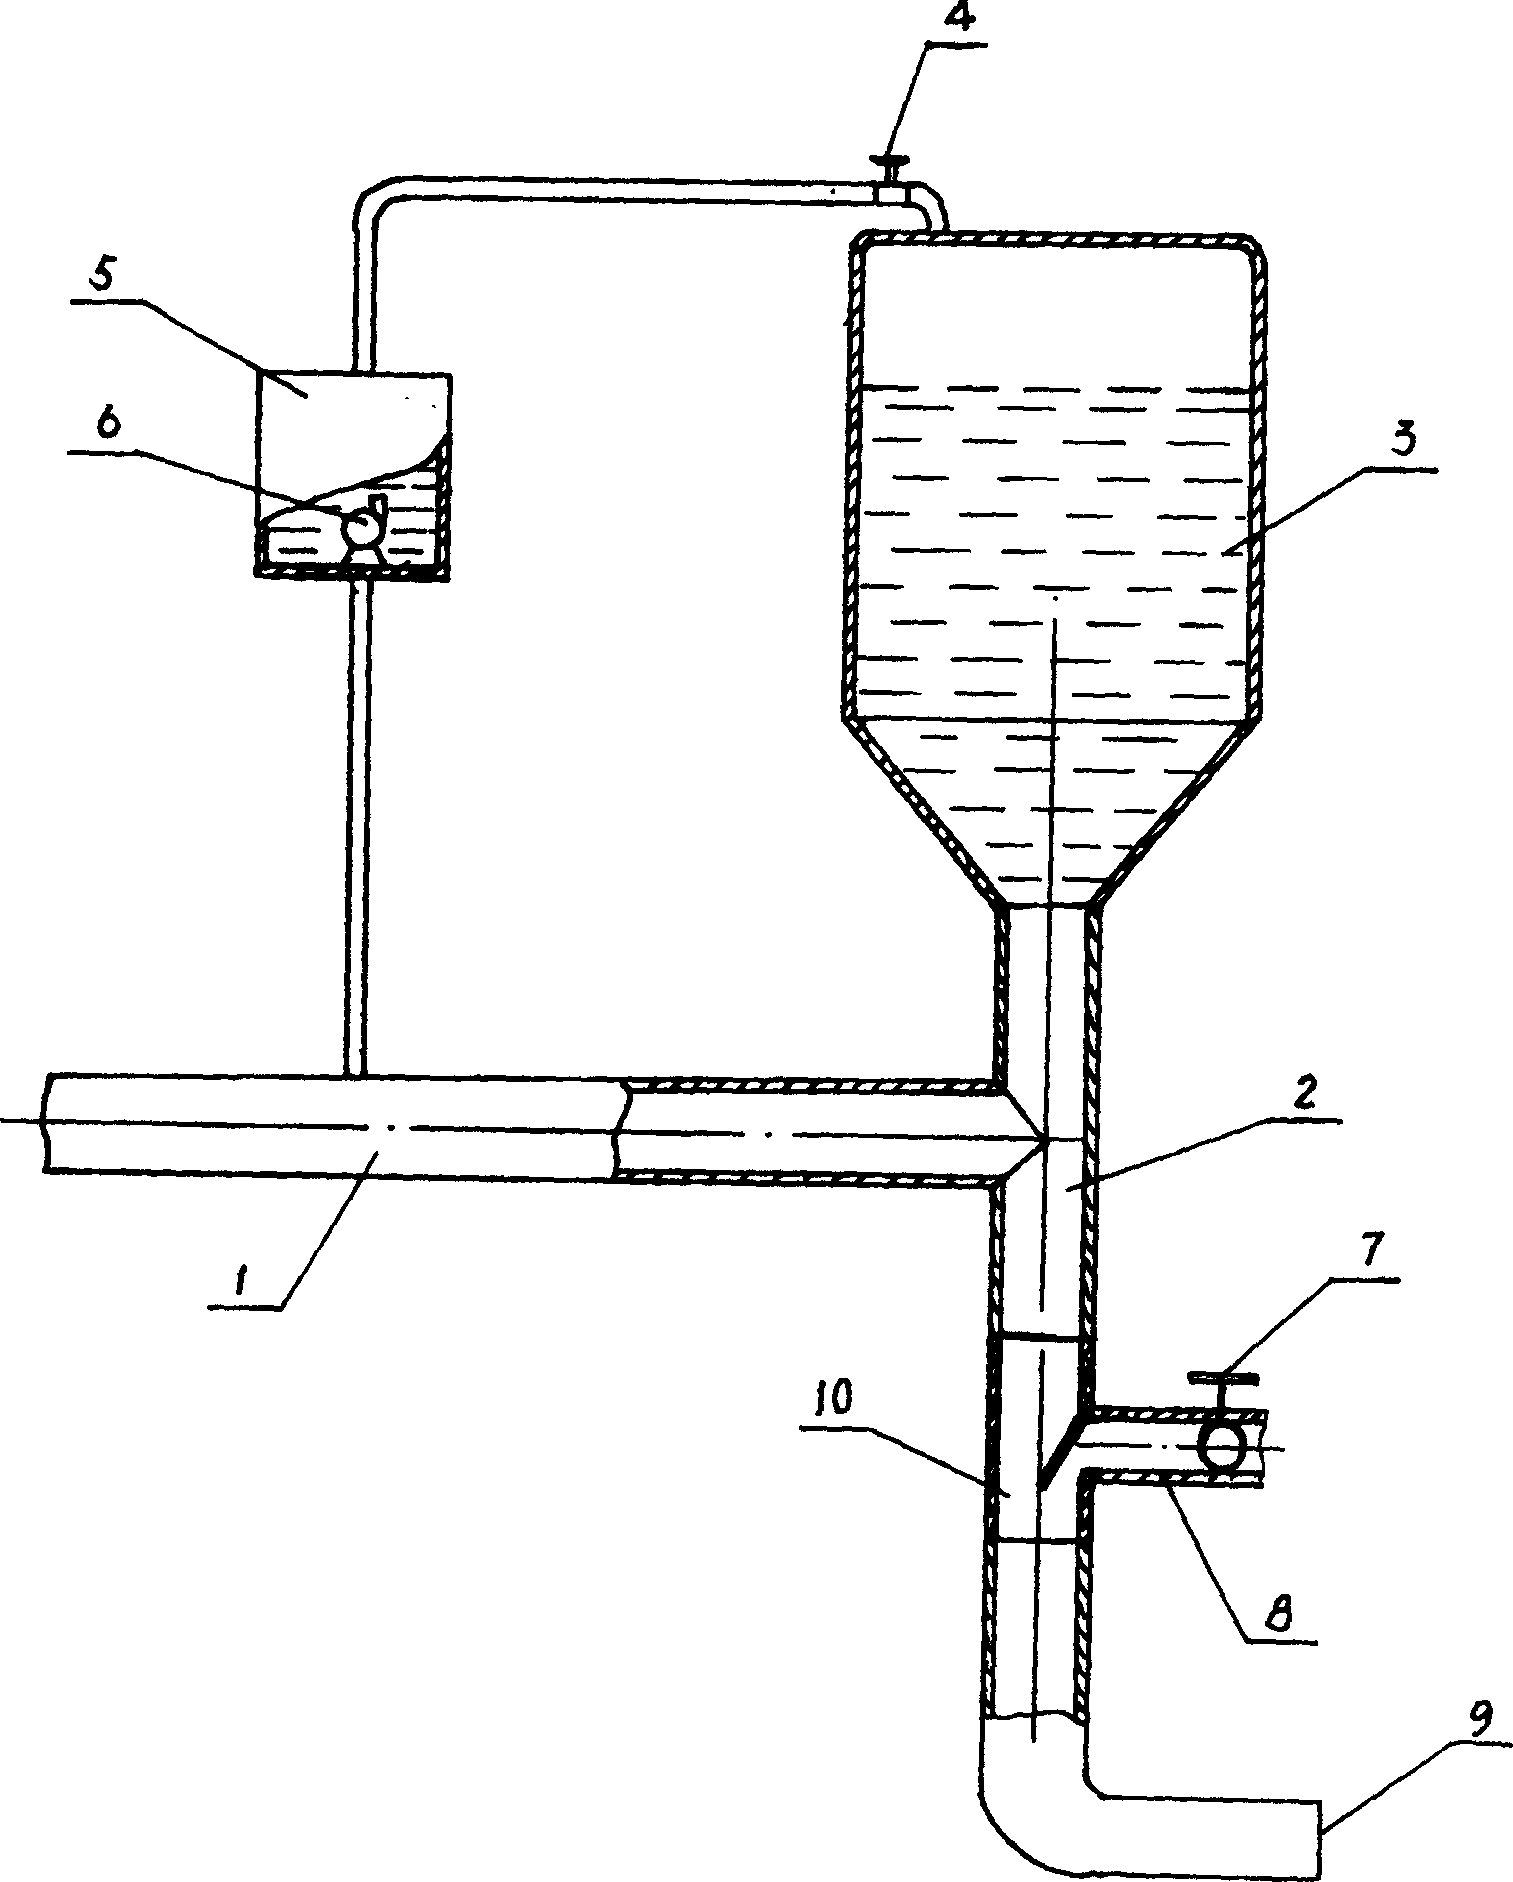 Method and apparatus for auto-increasing pressure of tap-water